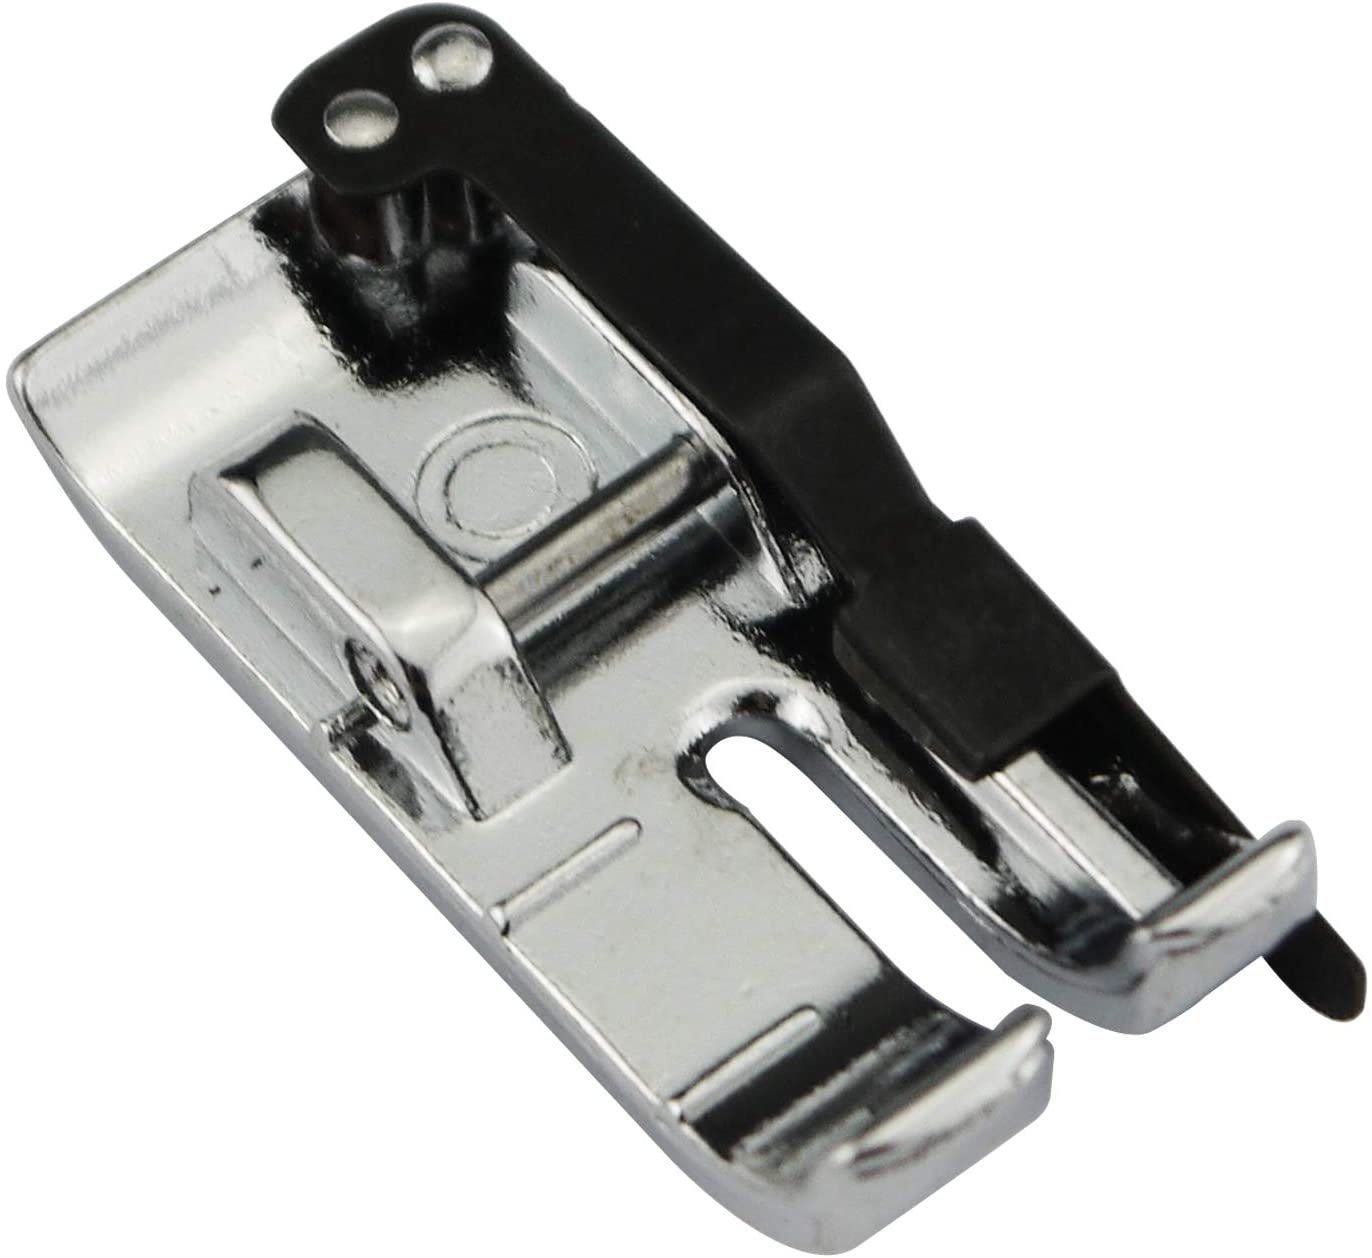 Even Feed Walking Presser Foot Attachment with Guide Bar for Brother Sewing  Machines